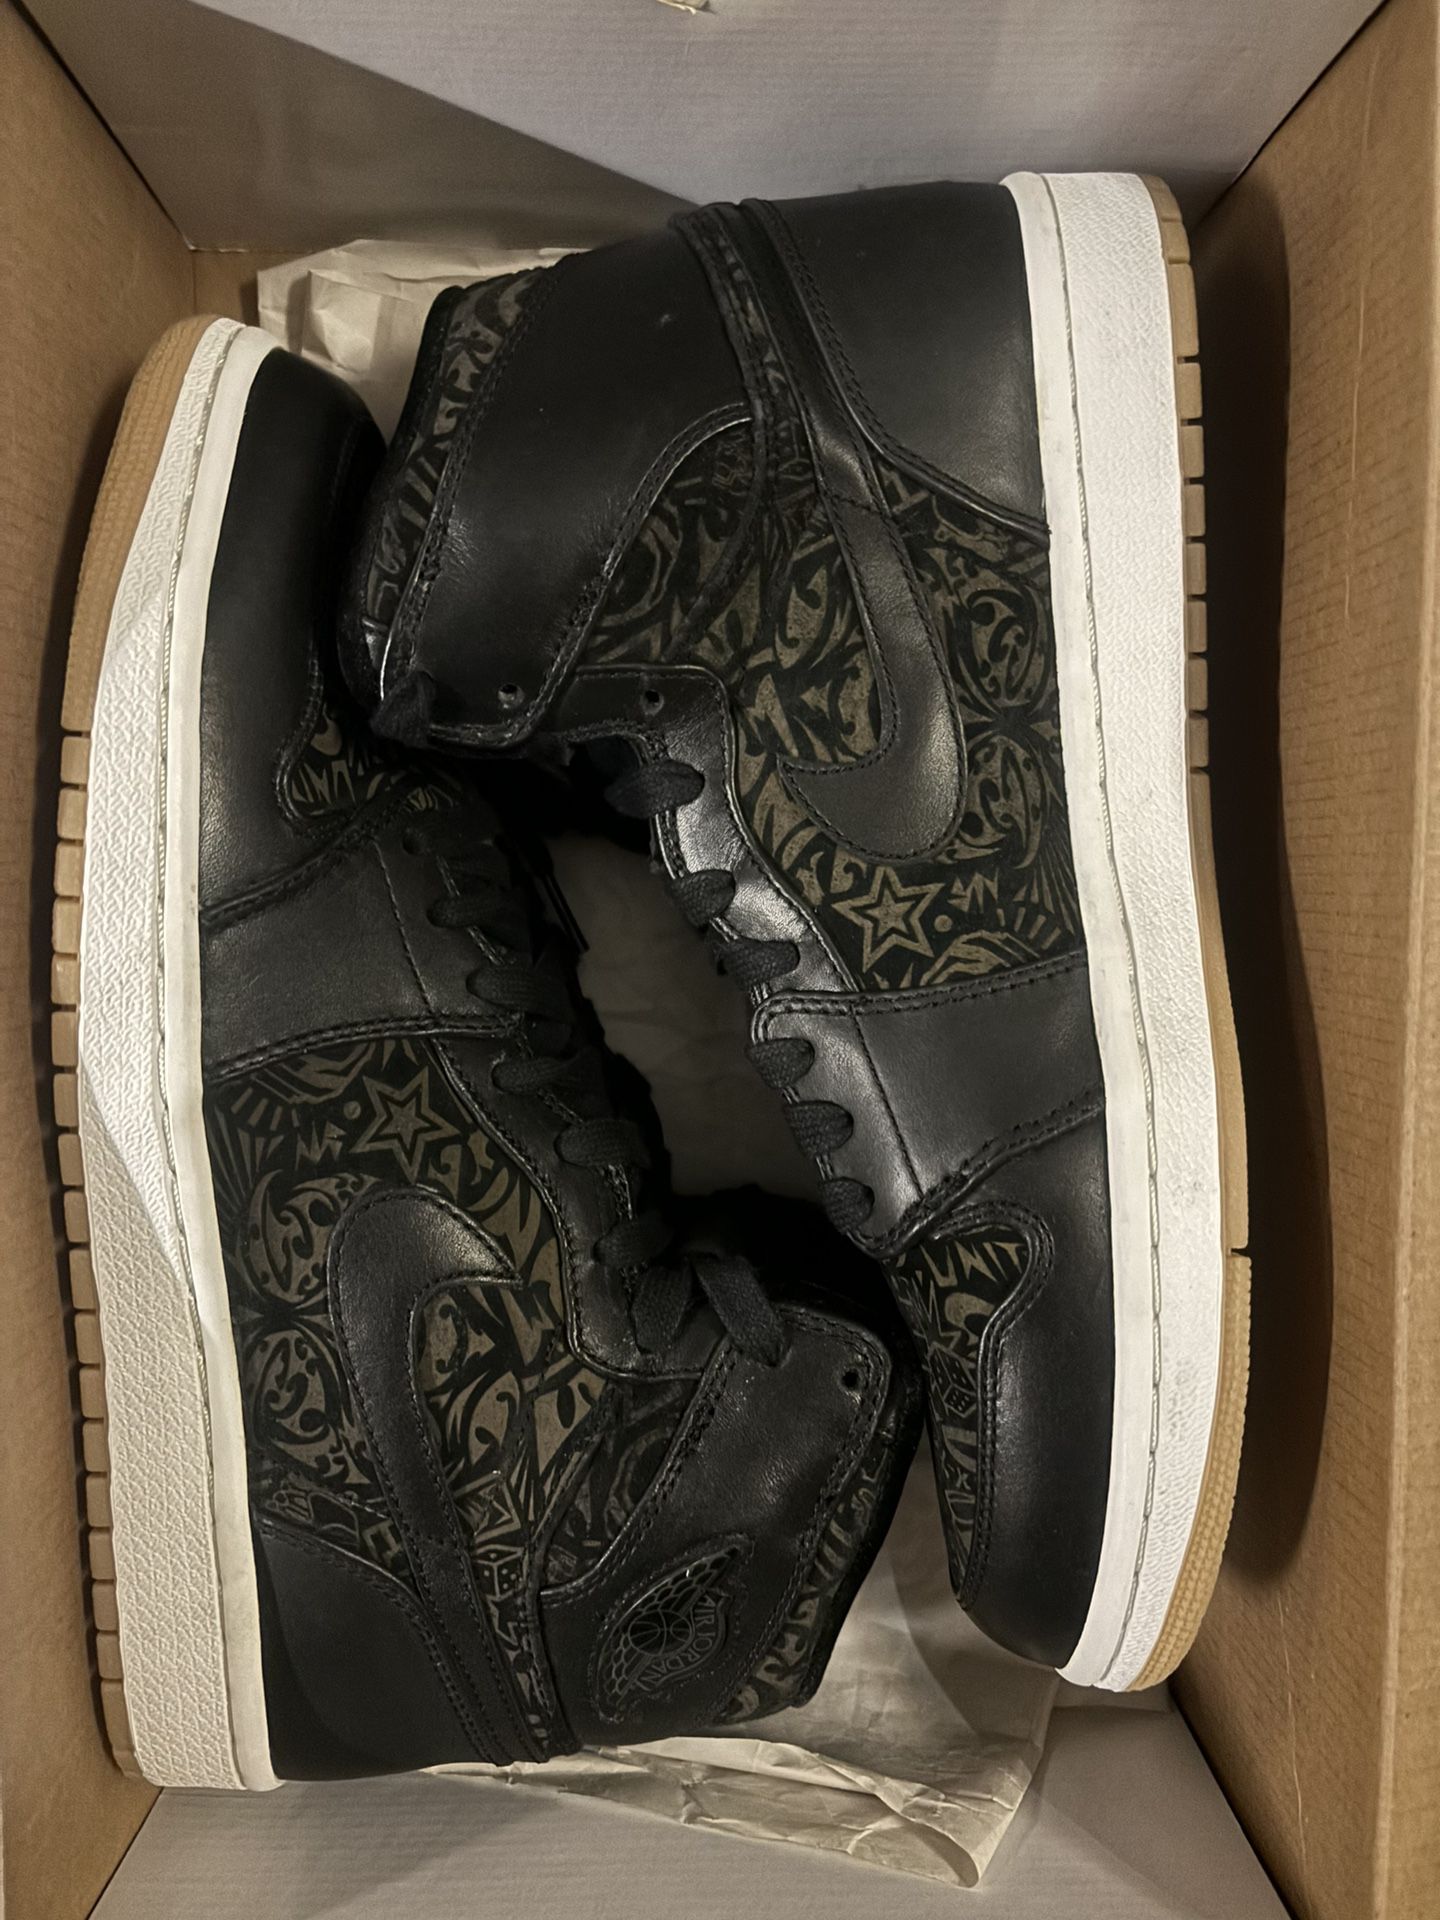 Just can’t get over the quality they made back then. Jordan 1 High Premiere “Laser” size(10M). DS(New). Now Available. $275. Cash or B/O. Trades alway